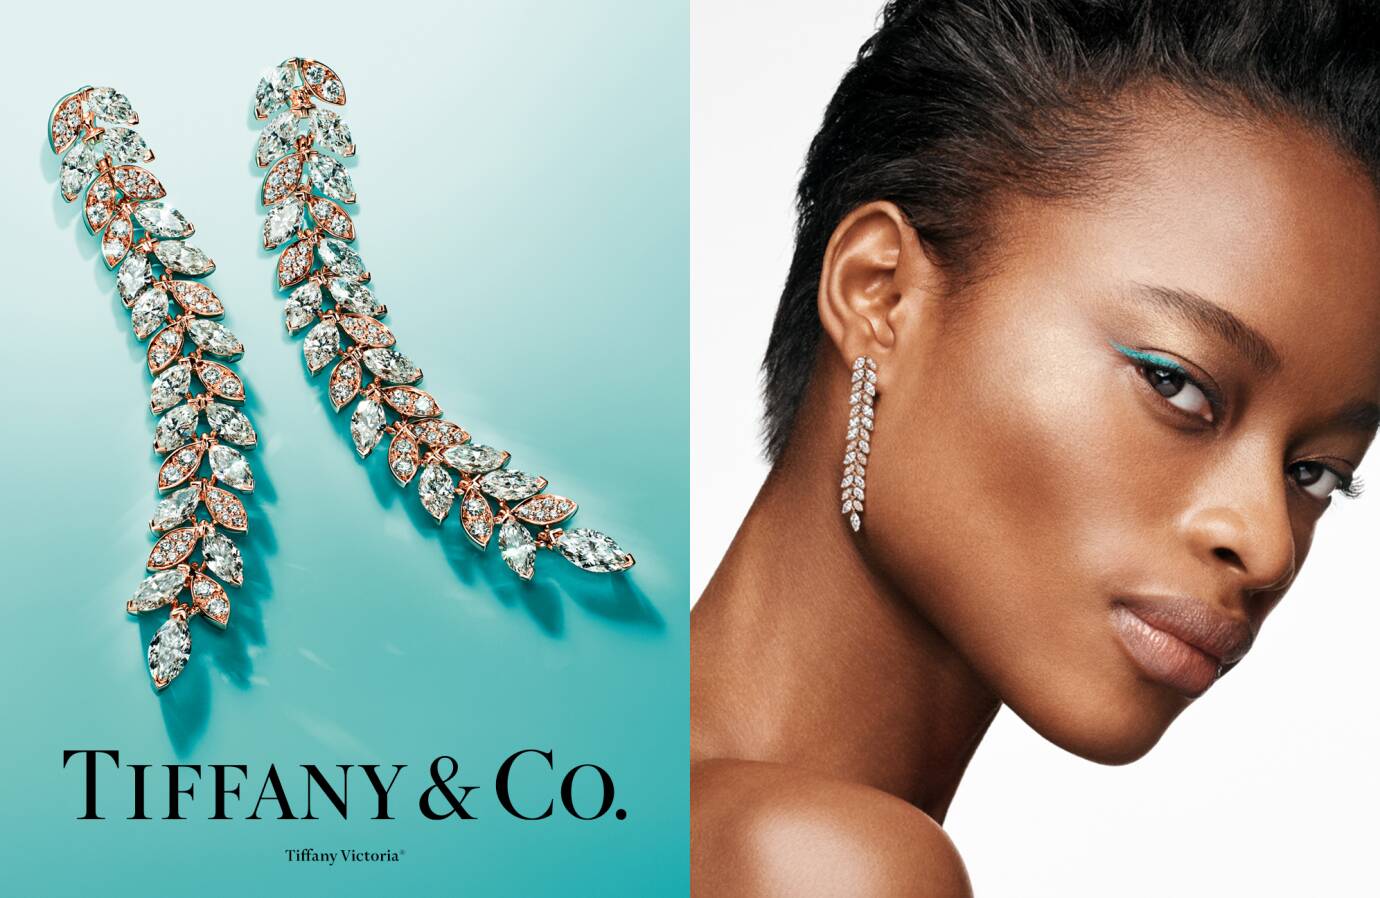 LVMH to Acquire French Jewelry Group in Tiffany Boost - Rapaport